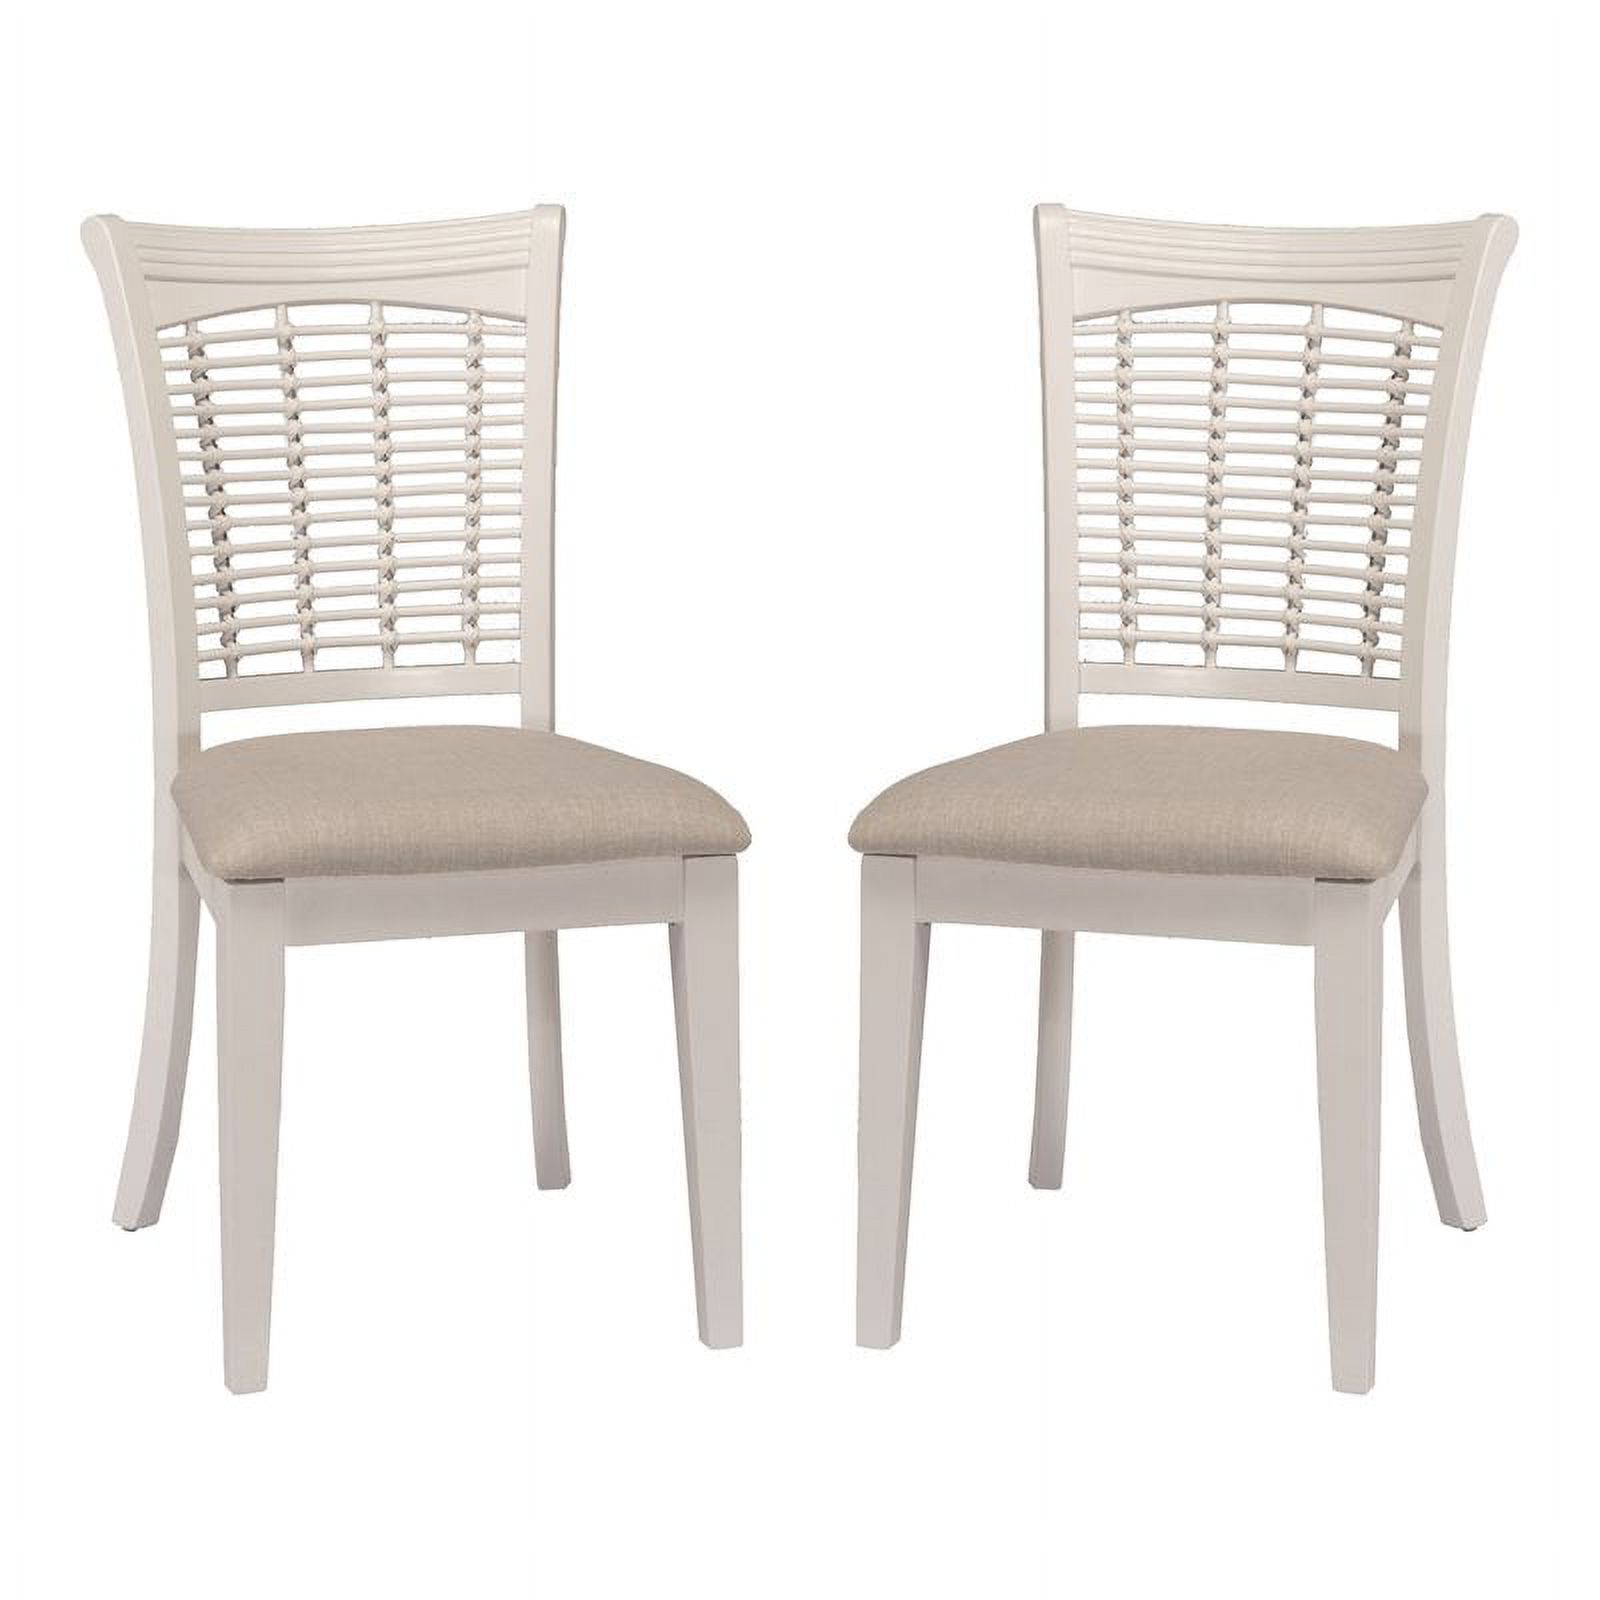 Hillsdale Furniture Bayberry Wood Dining Chair, Set of 2, White - image 1 of 1